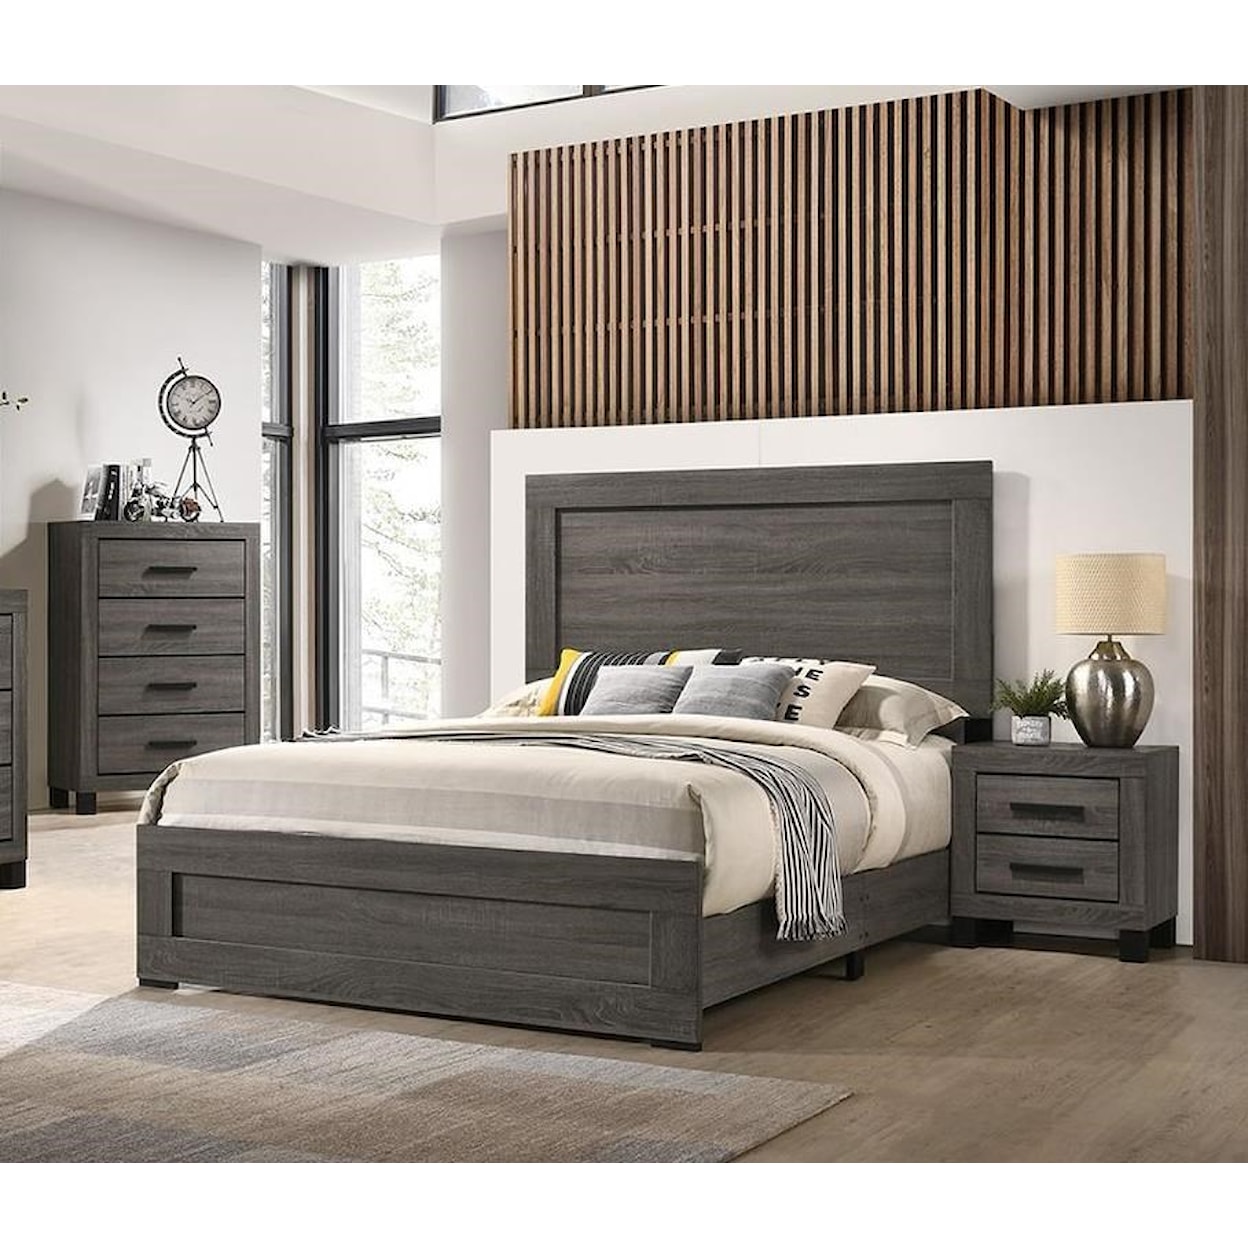 Lifestyle 8321 5 Piece Full Panel Bedroom Group